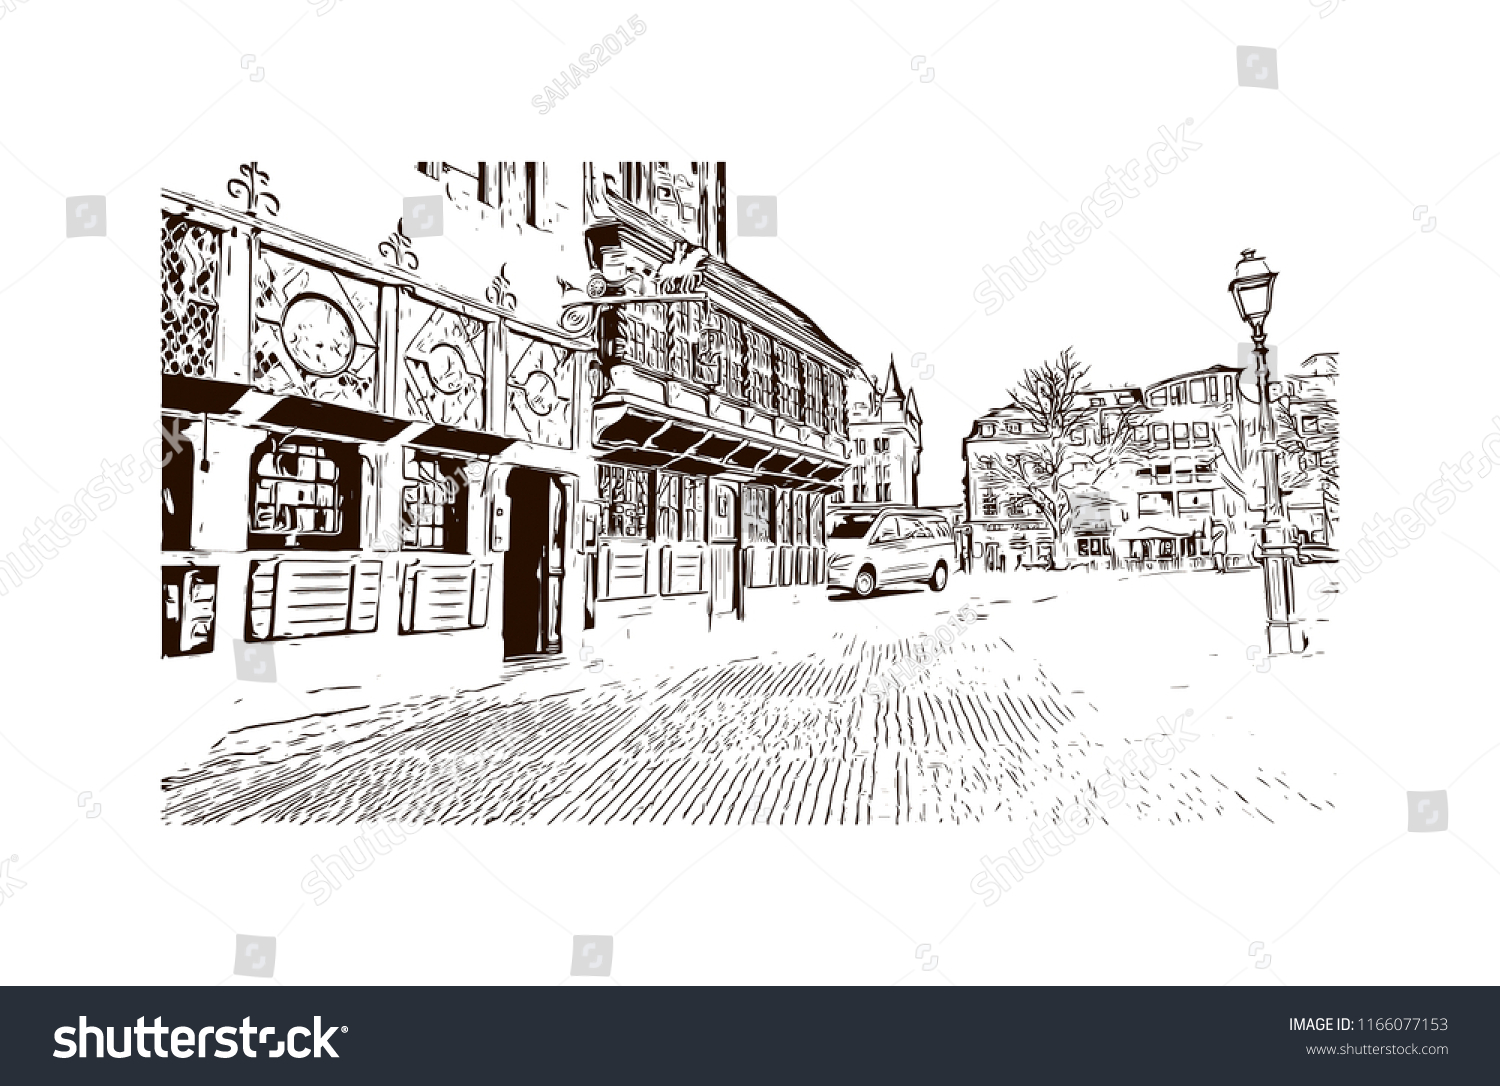 SVG of Building with landmark of Aachen City in Germany. Hand drawn sketch illustration in vector. svg